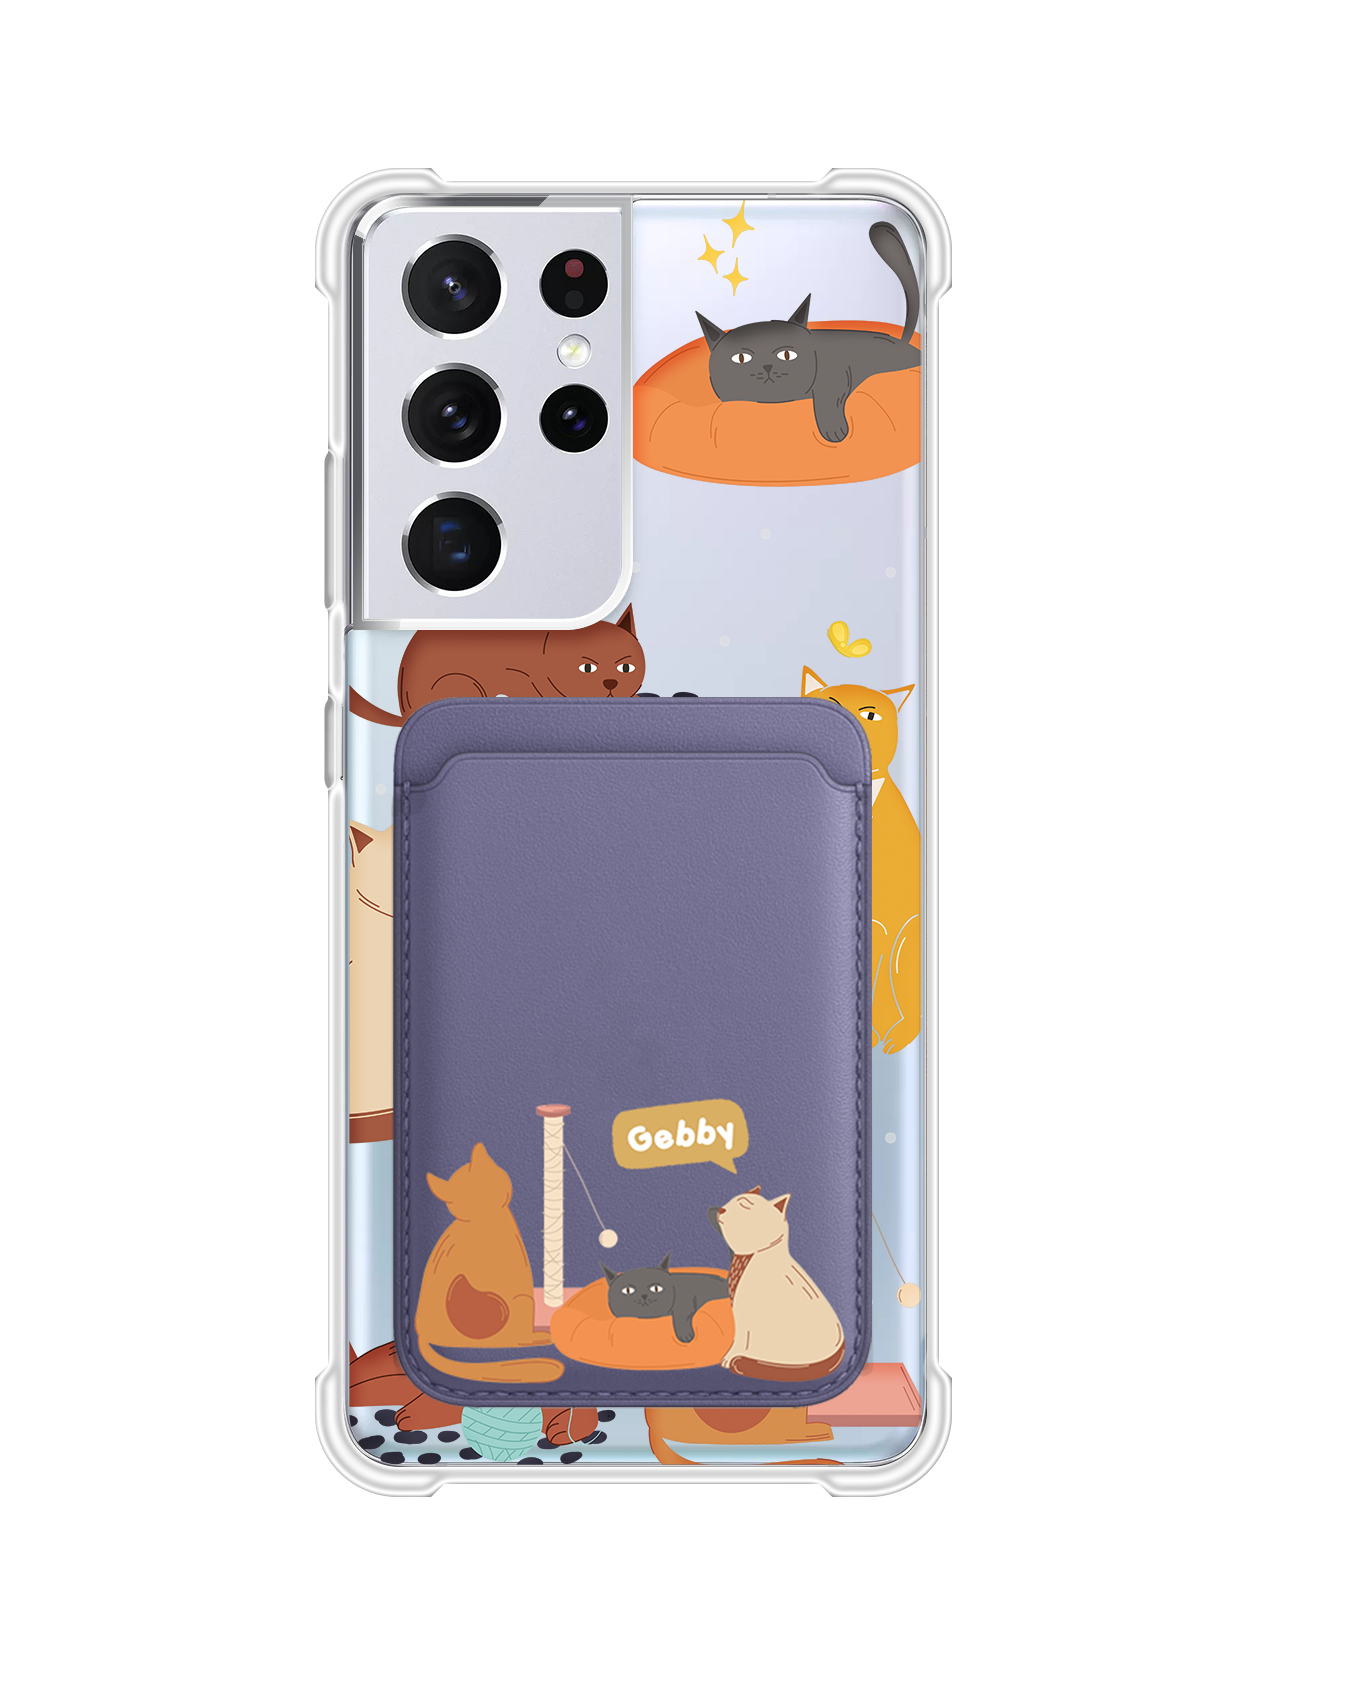 Android Magnetic Wallet Case - Playful Cat 1.0